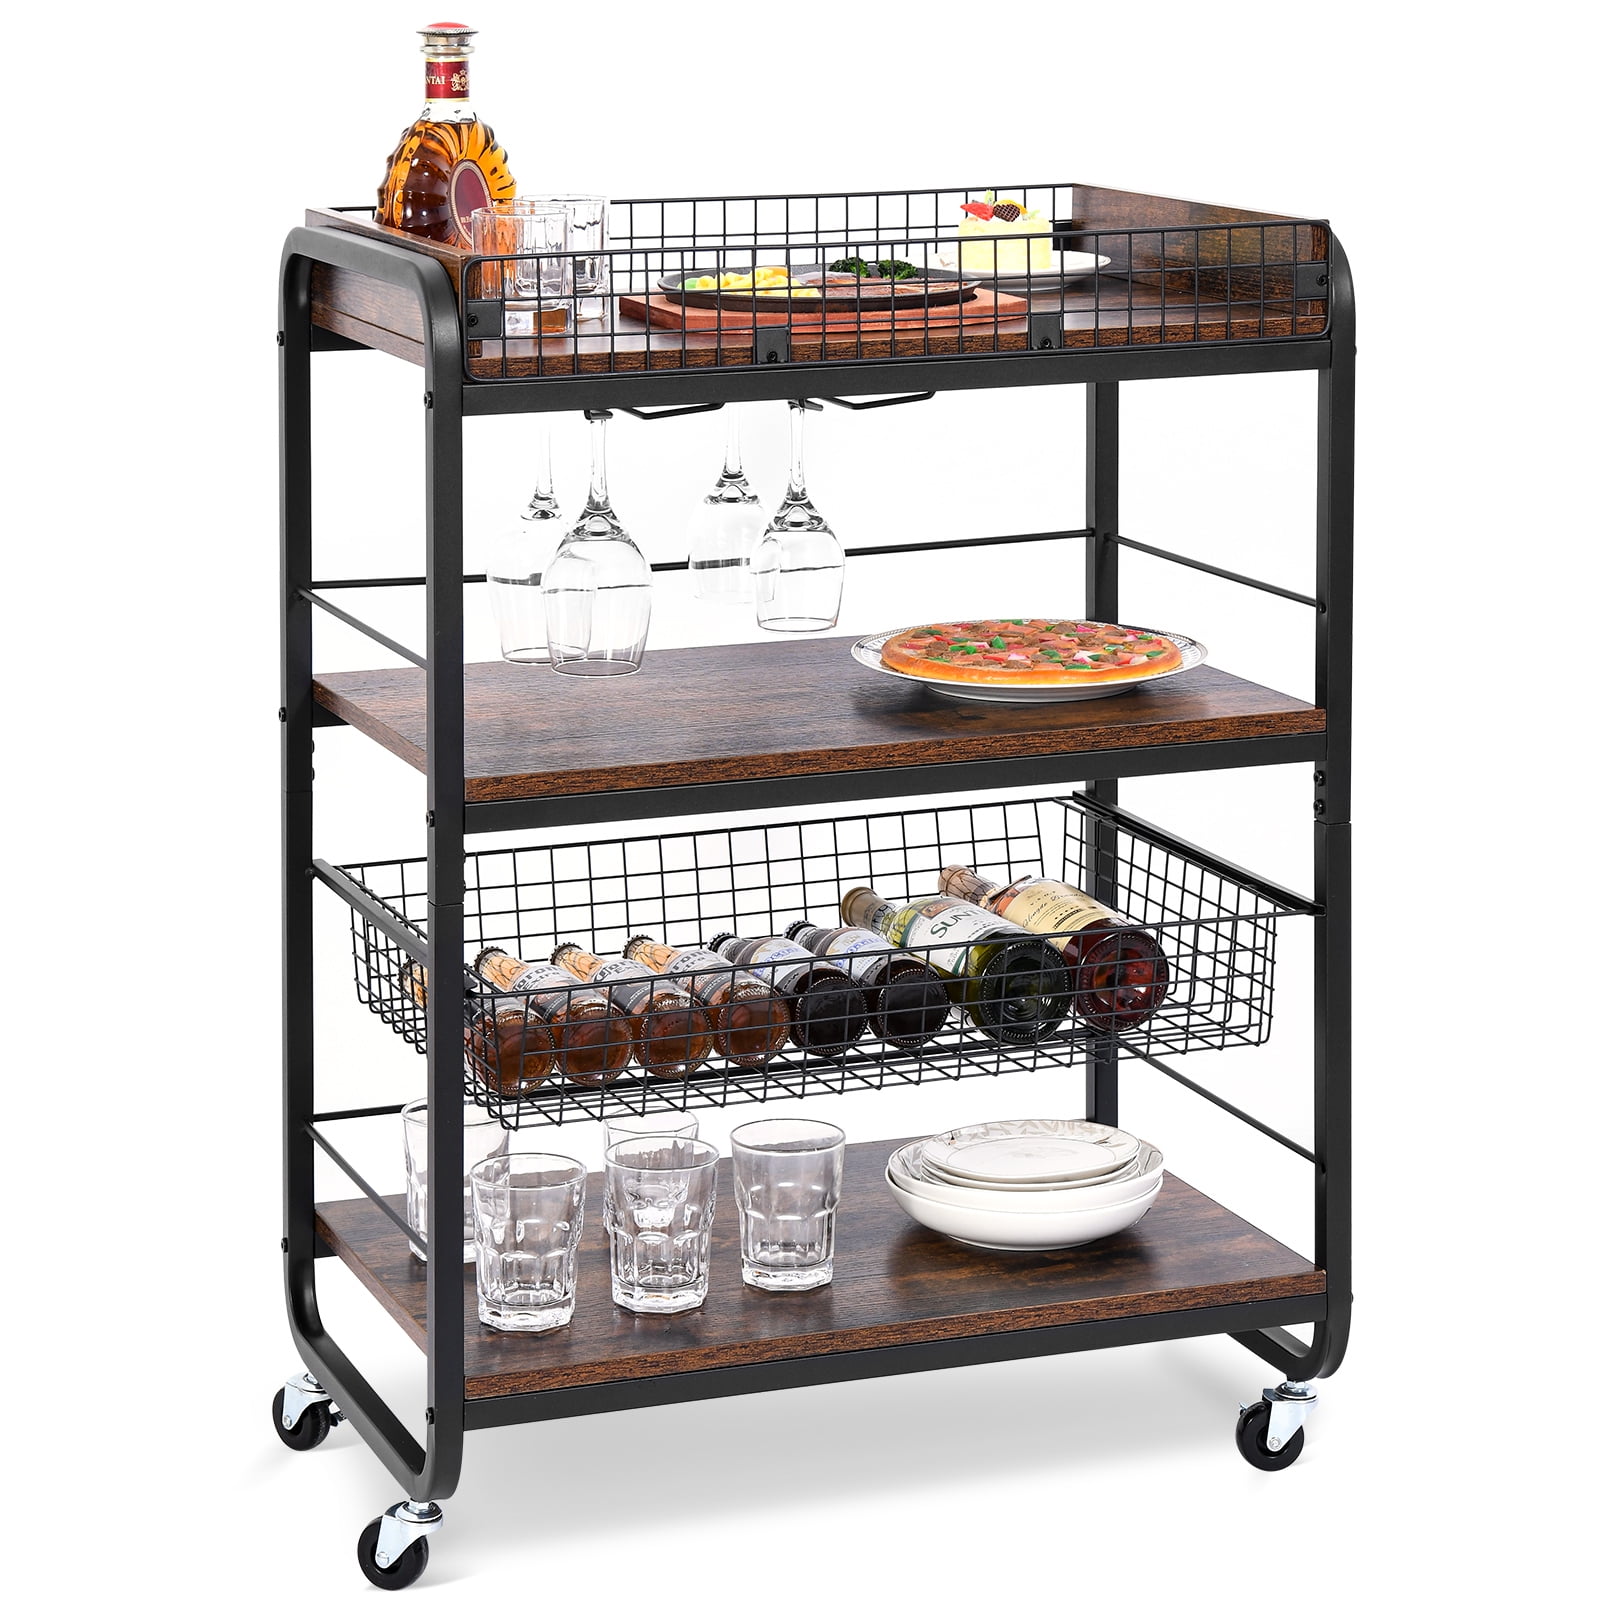 Size : A Kitchen Serving Trolley Stainless Steel Hotel Cart Storage Cart Laundry Hotel Cleaning Cart Service Car Trolley with Wine Rack 